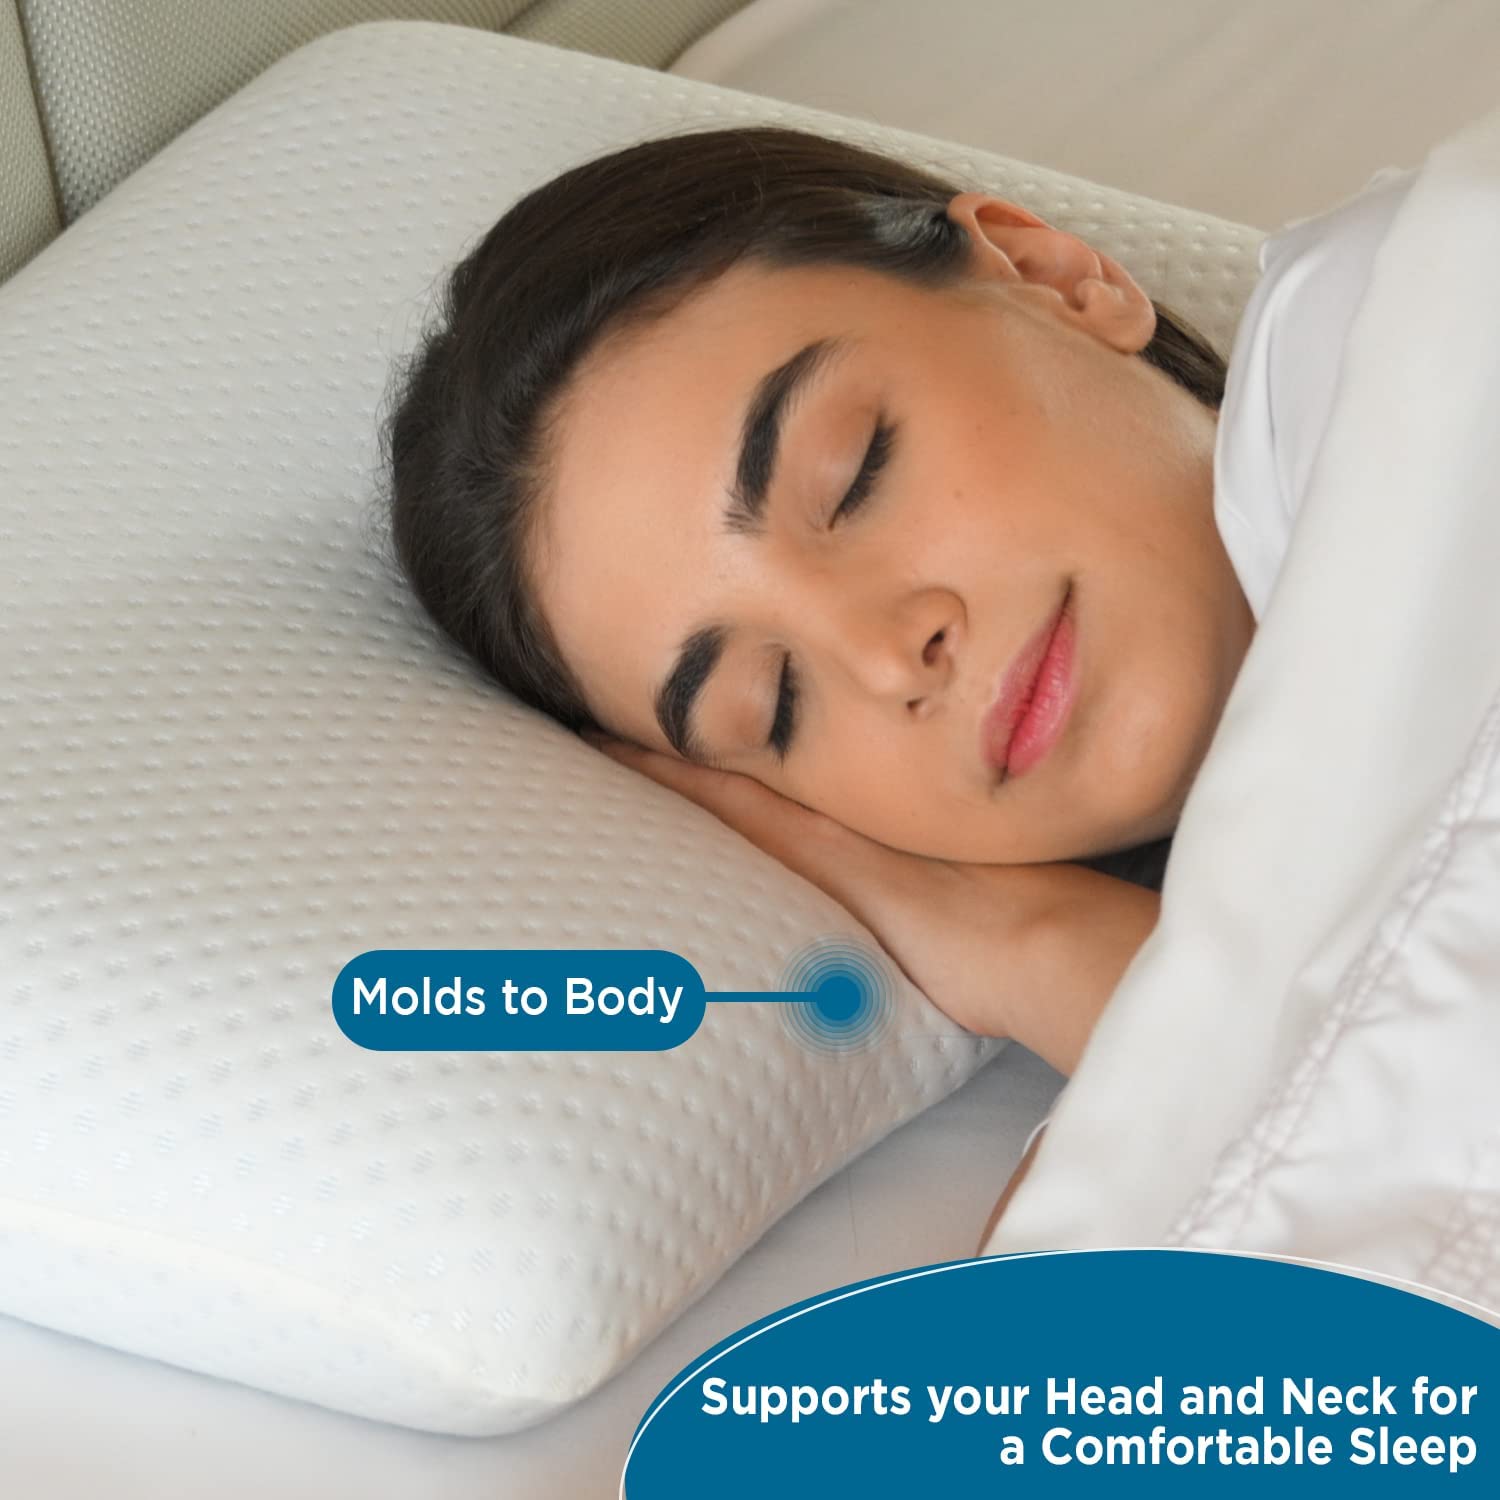 What are the Comfortable Pillow For Sleeping?